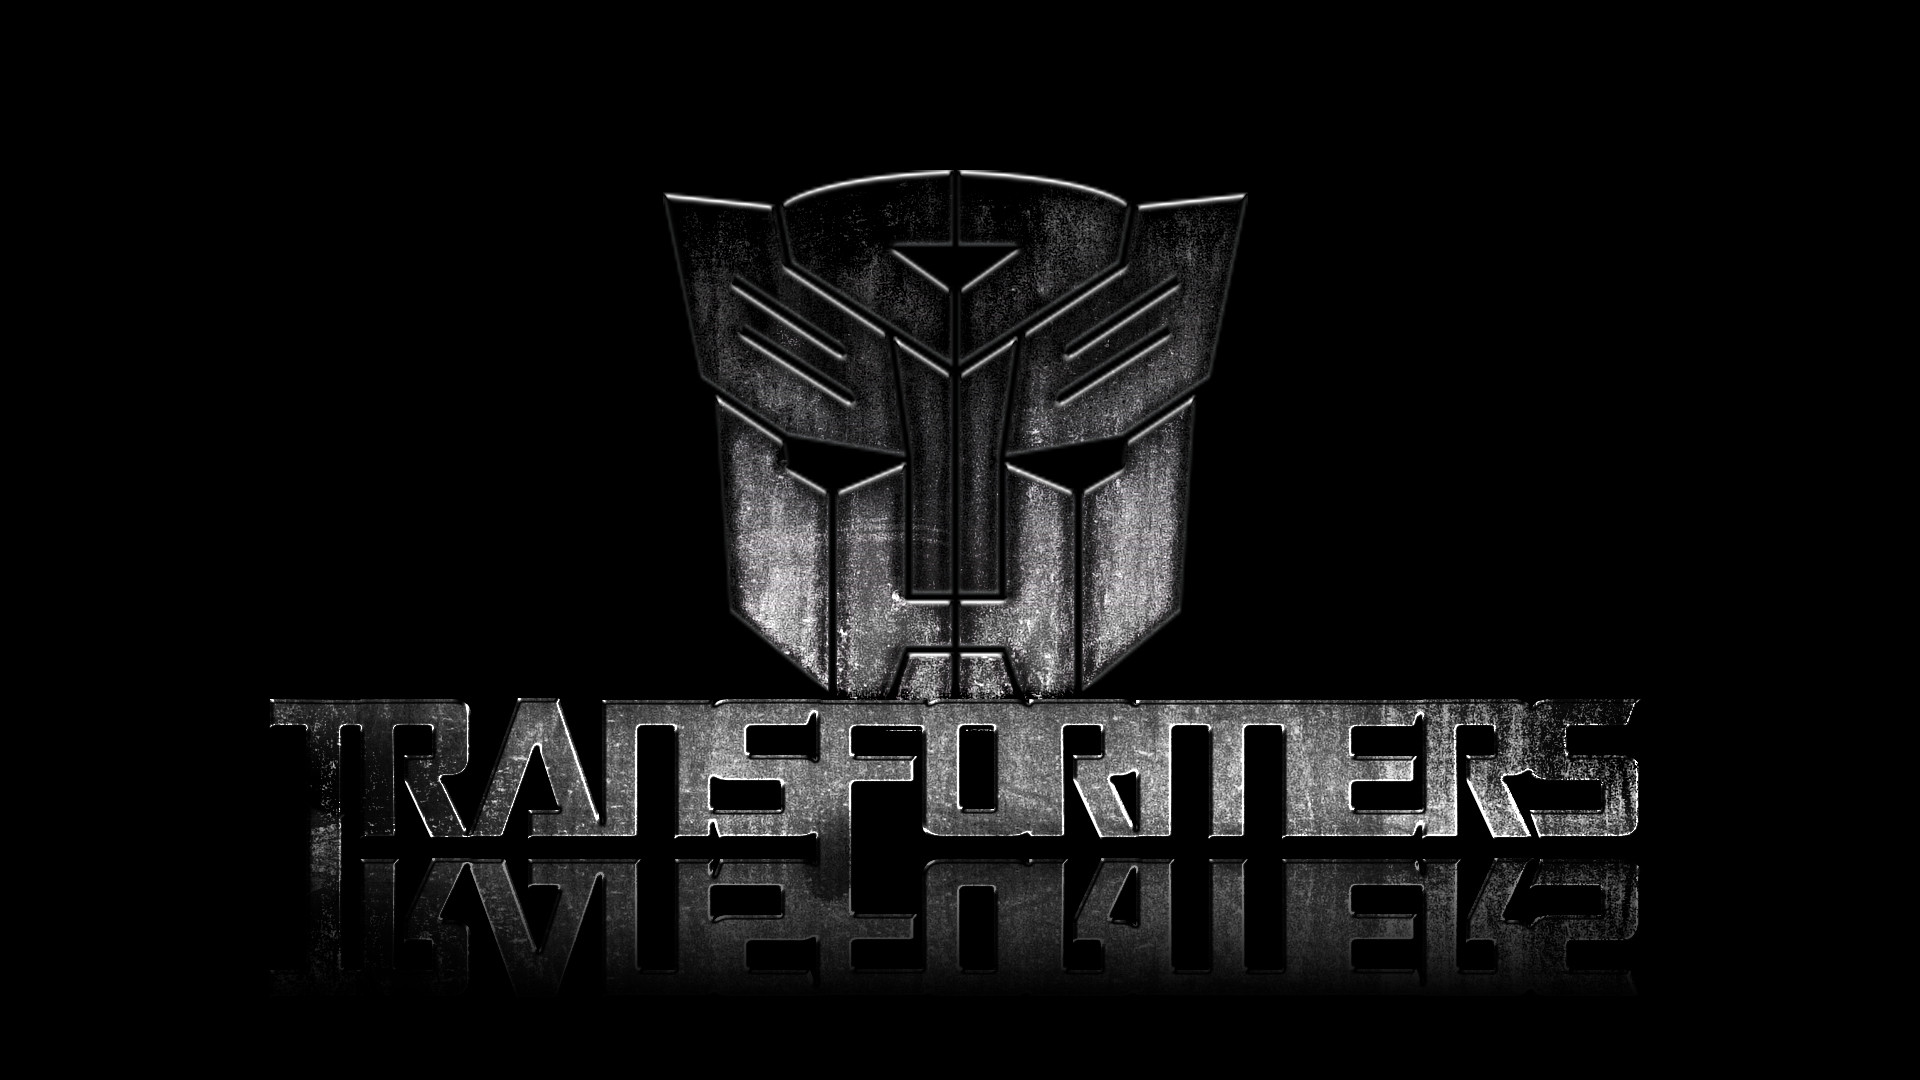 MovieOptimusSidex Transformers Movie Optimus Prime Face HD Wallpapers Pinterest Wallpaper and Face